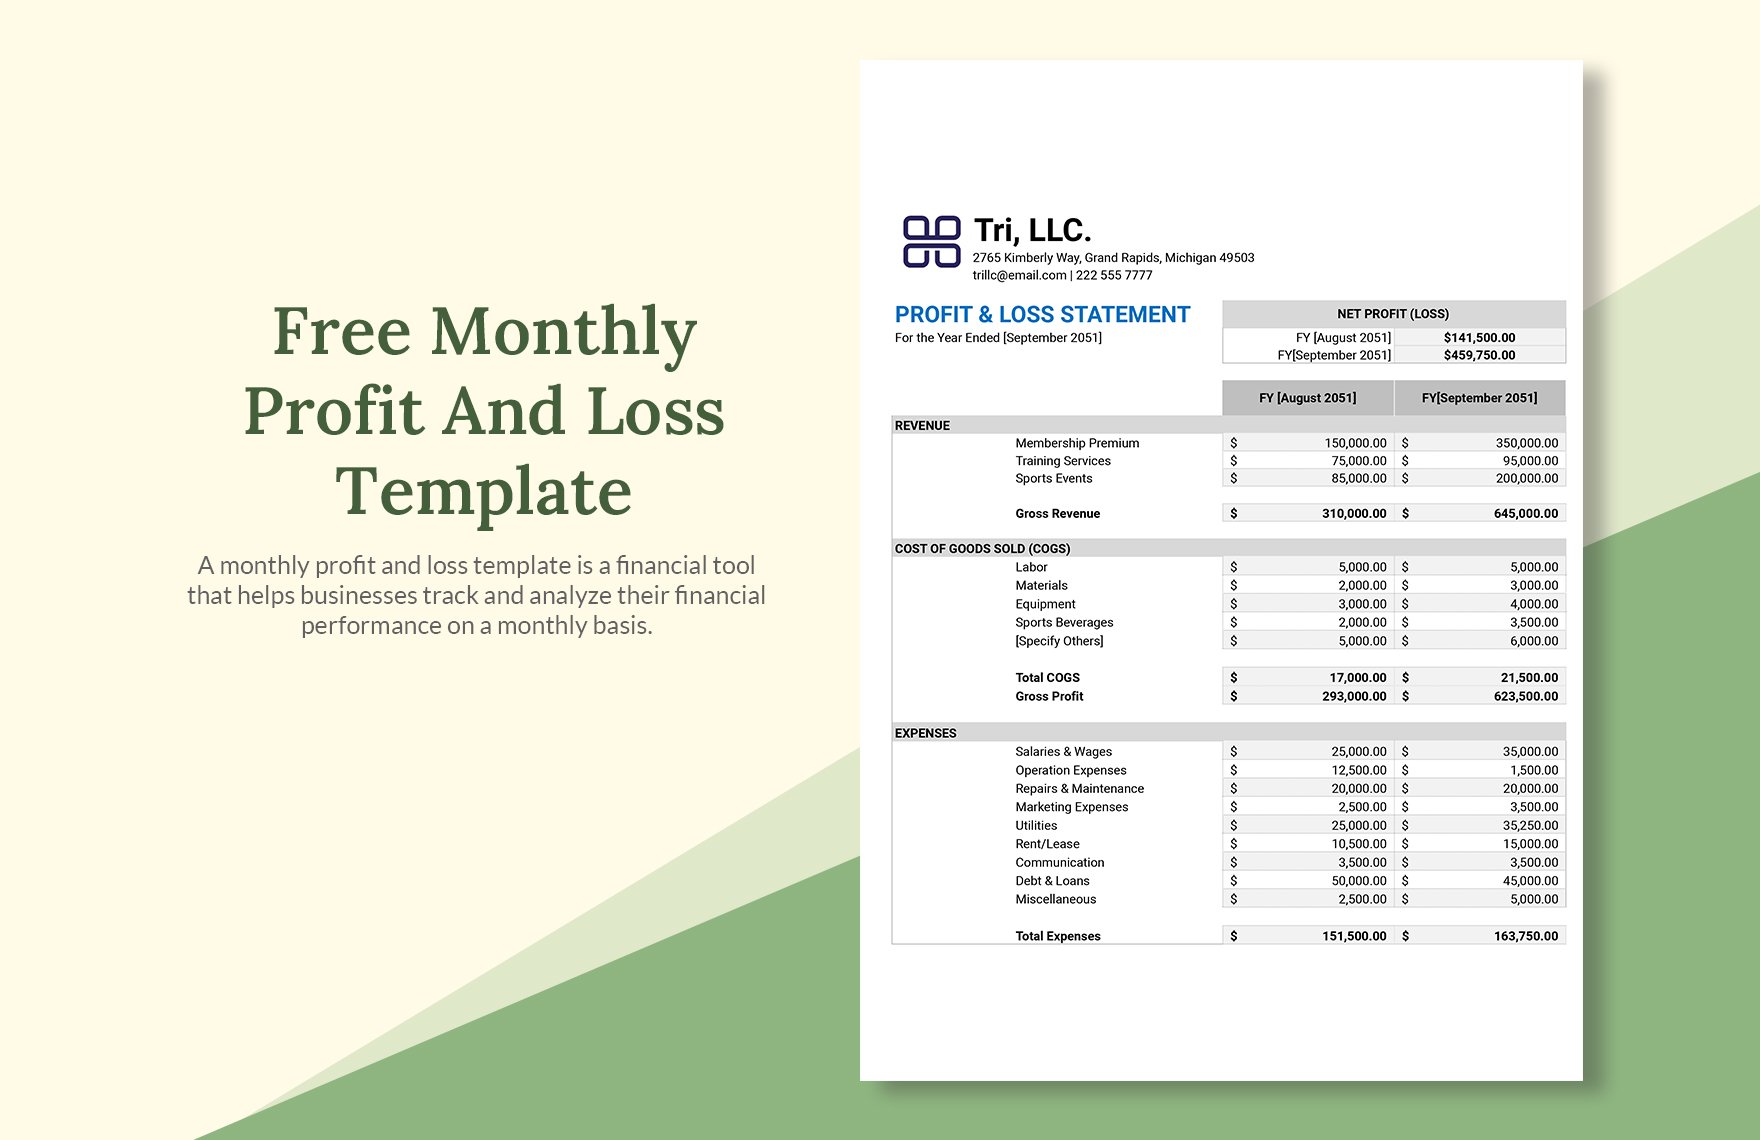 Free Monthly Profit And Loss Template Download in Excel, Google